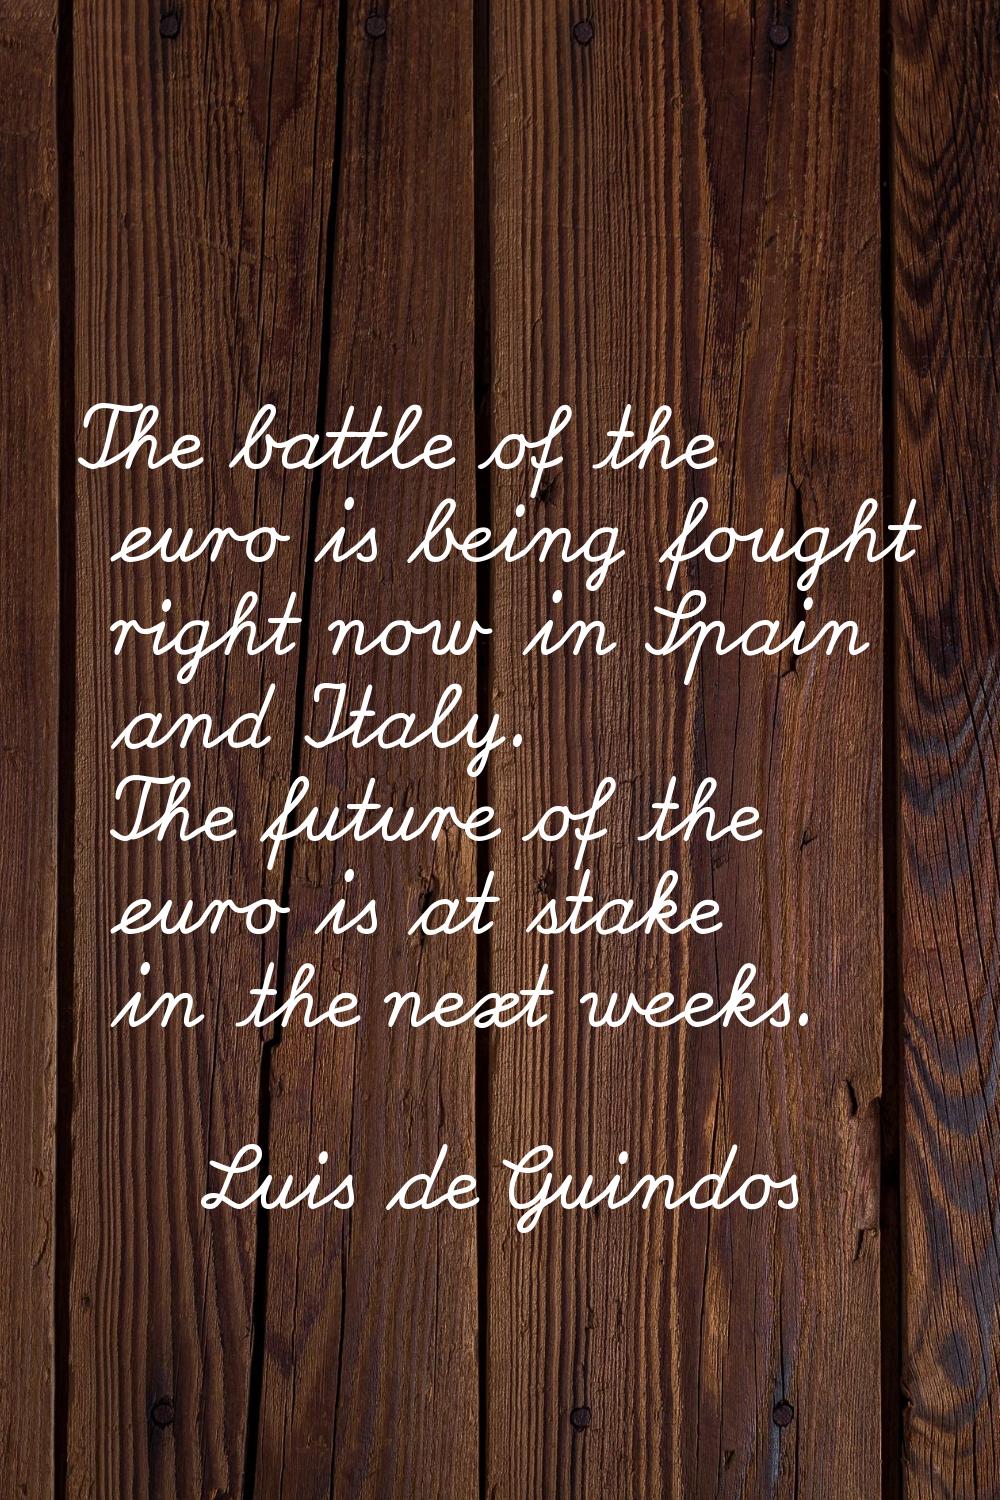 The battle of the euro is being fought right now in Spain and Italy. The future of the euro is at s